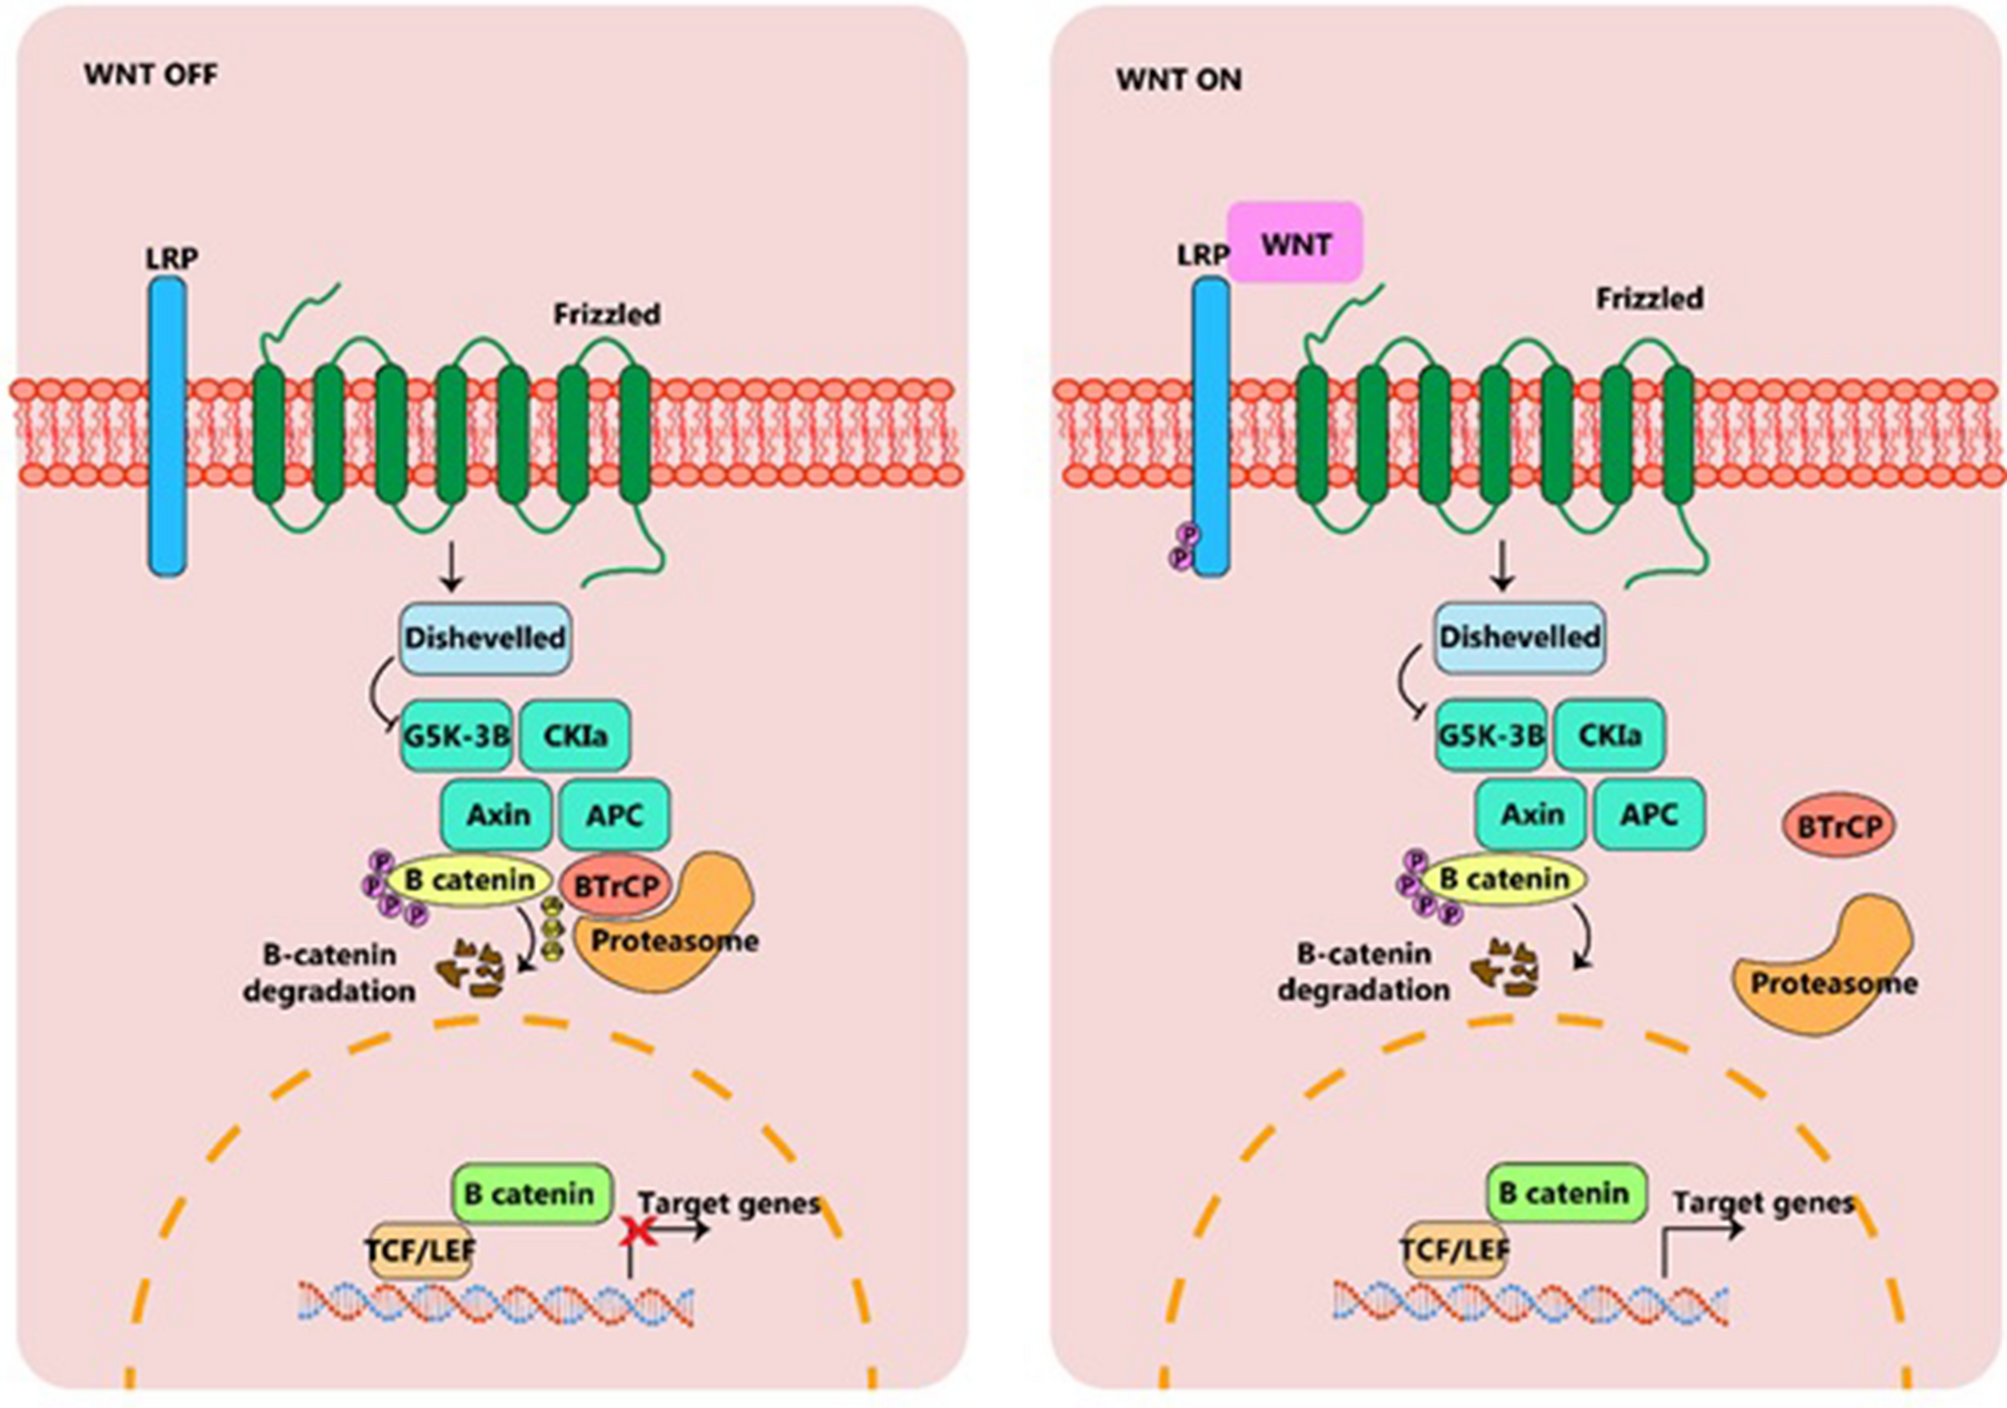 Wnt, notch signaling and exercise: what are their functions?